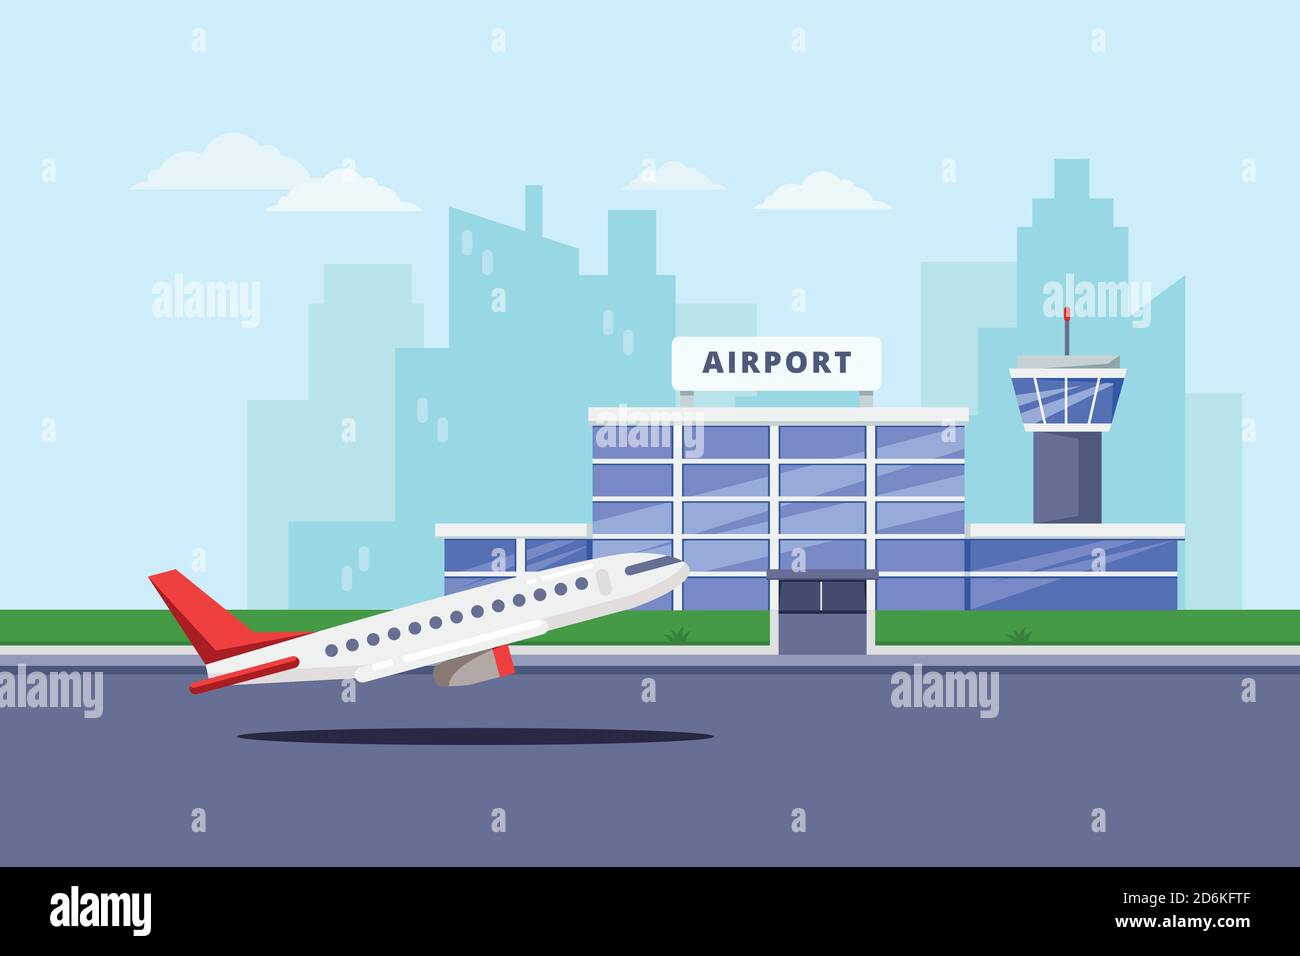 Airport terminal building and taking off aircraft, vector flat illustration. Air travel background and design elements. Stock Vector